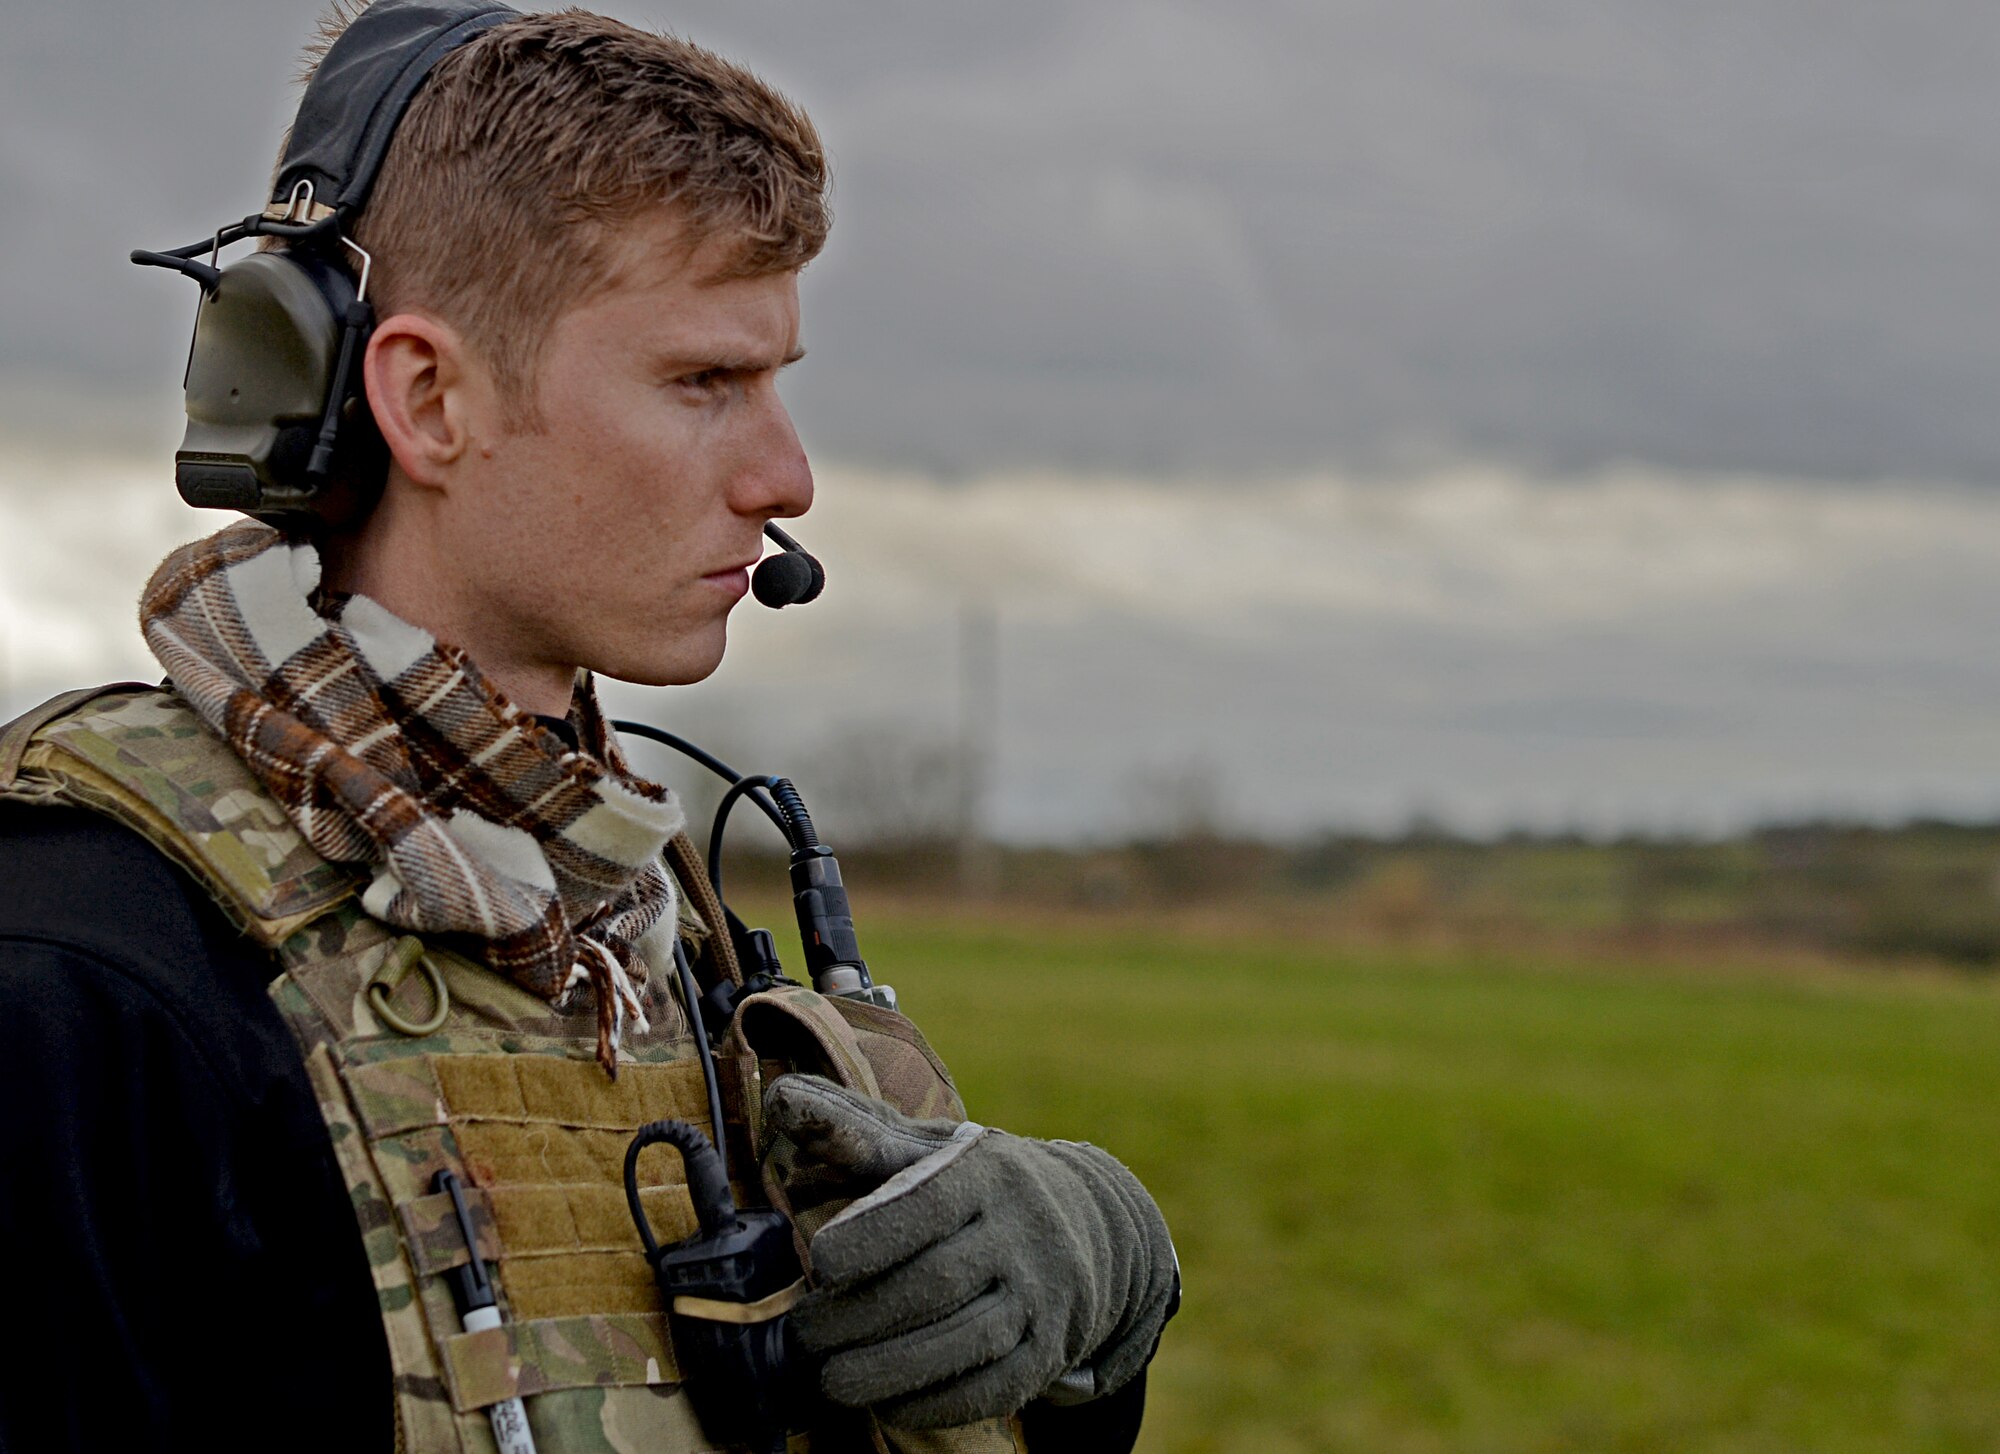 Staff Sgt. Joseph Bland, 56th Rescue Squadron special missions aviator, participates in a combat search and rescue task force training exercise near Hinderclay, England, Feb. 4, 2016. The 56th and 57th Rescue Squadrons coordinated with the 493rd and 494th Fighter Squadrons and the 100th Air Refueling Wing to take part in a recovery scenario. (U.S. Air Force photo/Senior Airman Erin Trower)